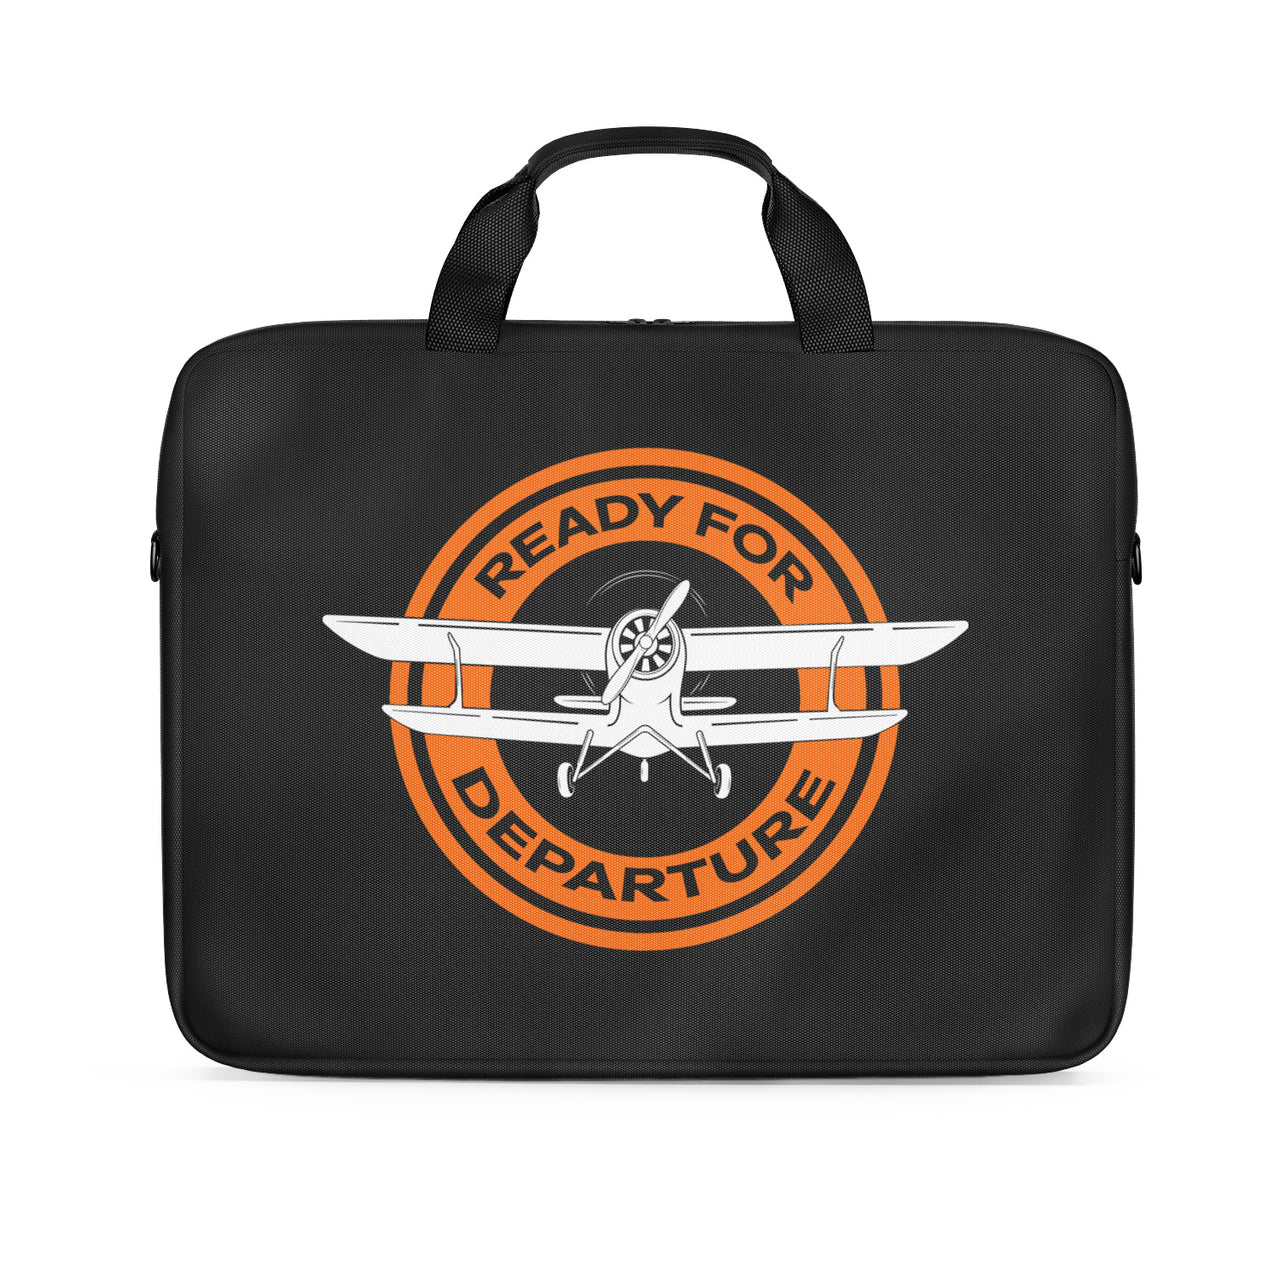 Ready for Departure Designed Laptop & Tablet Bags